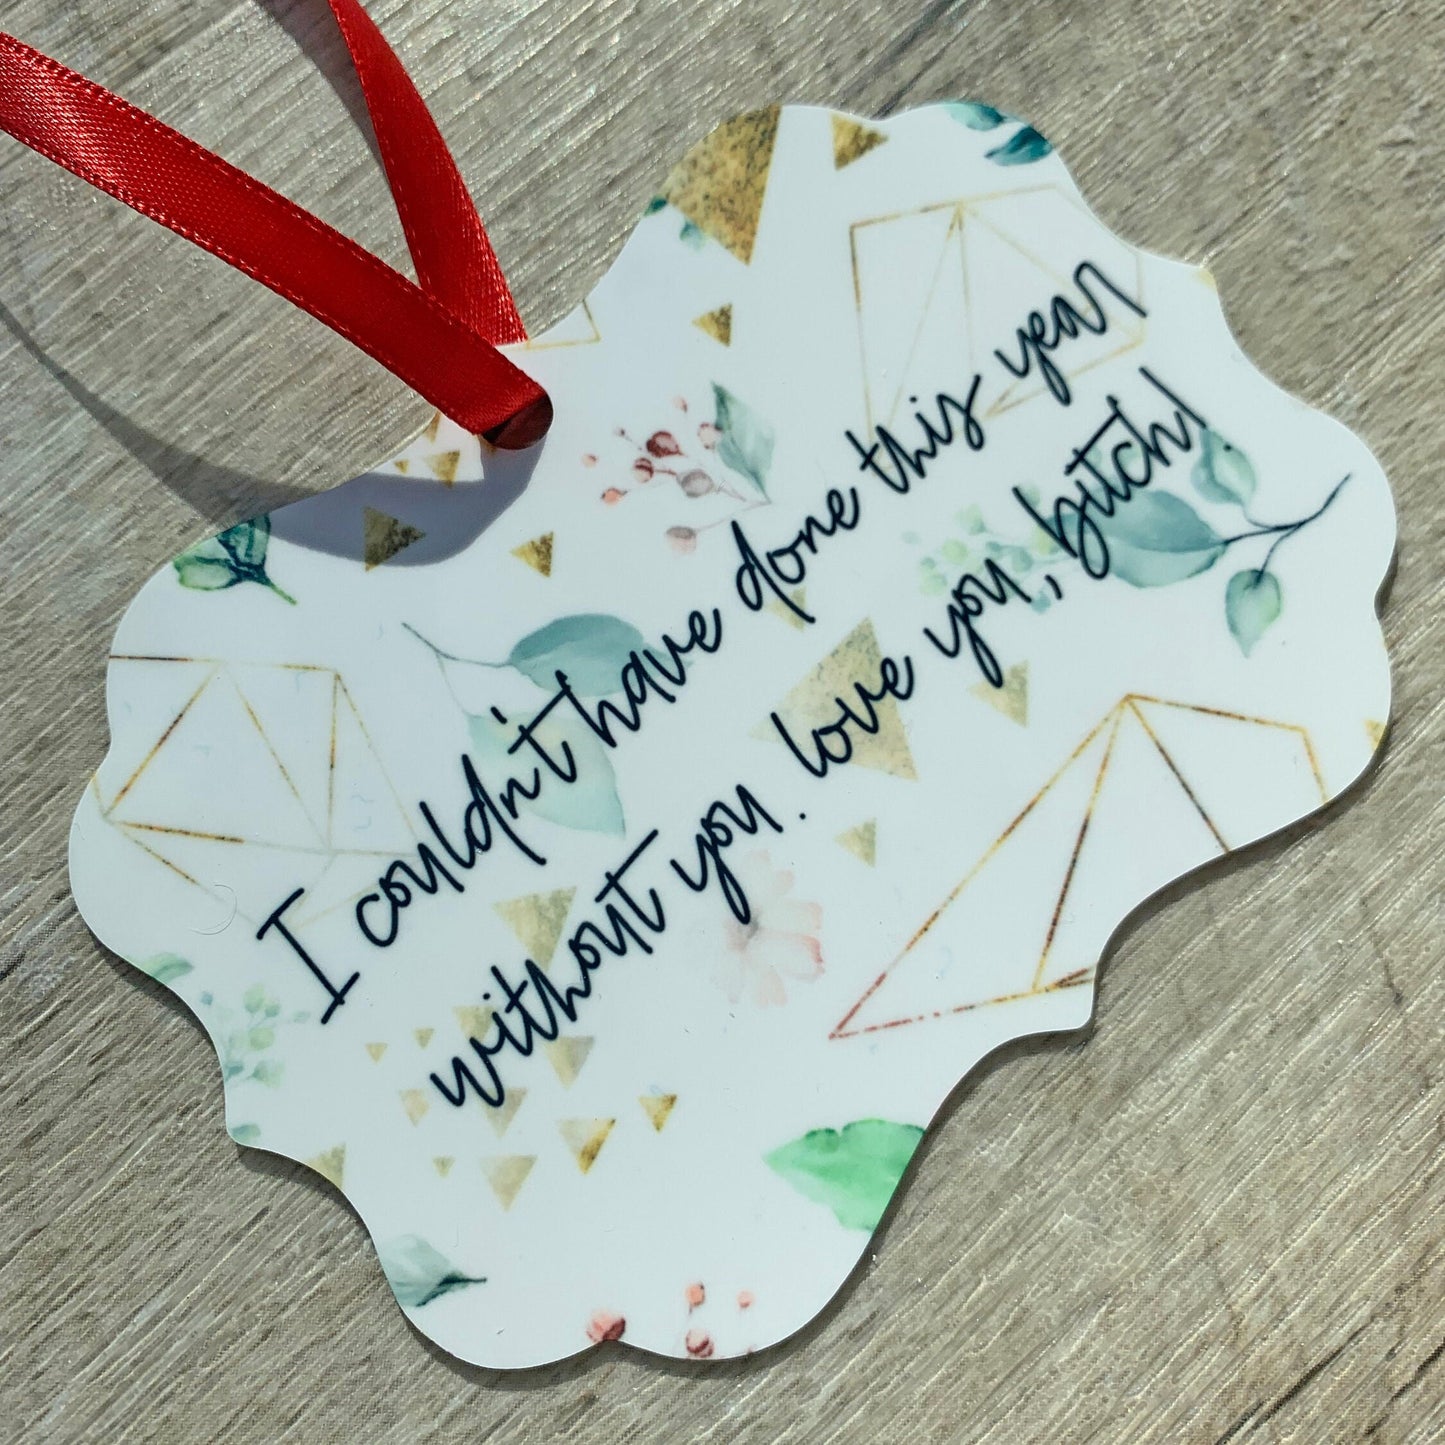 I Couldn't Have Done This Year Without You, Bitch! Ornament